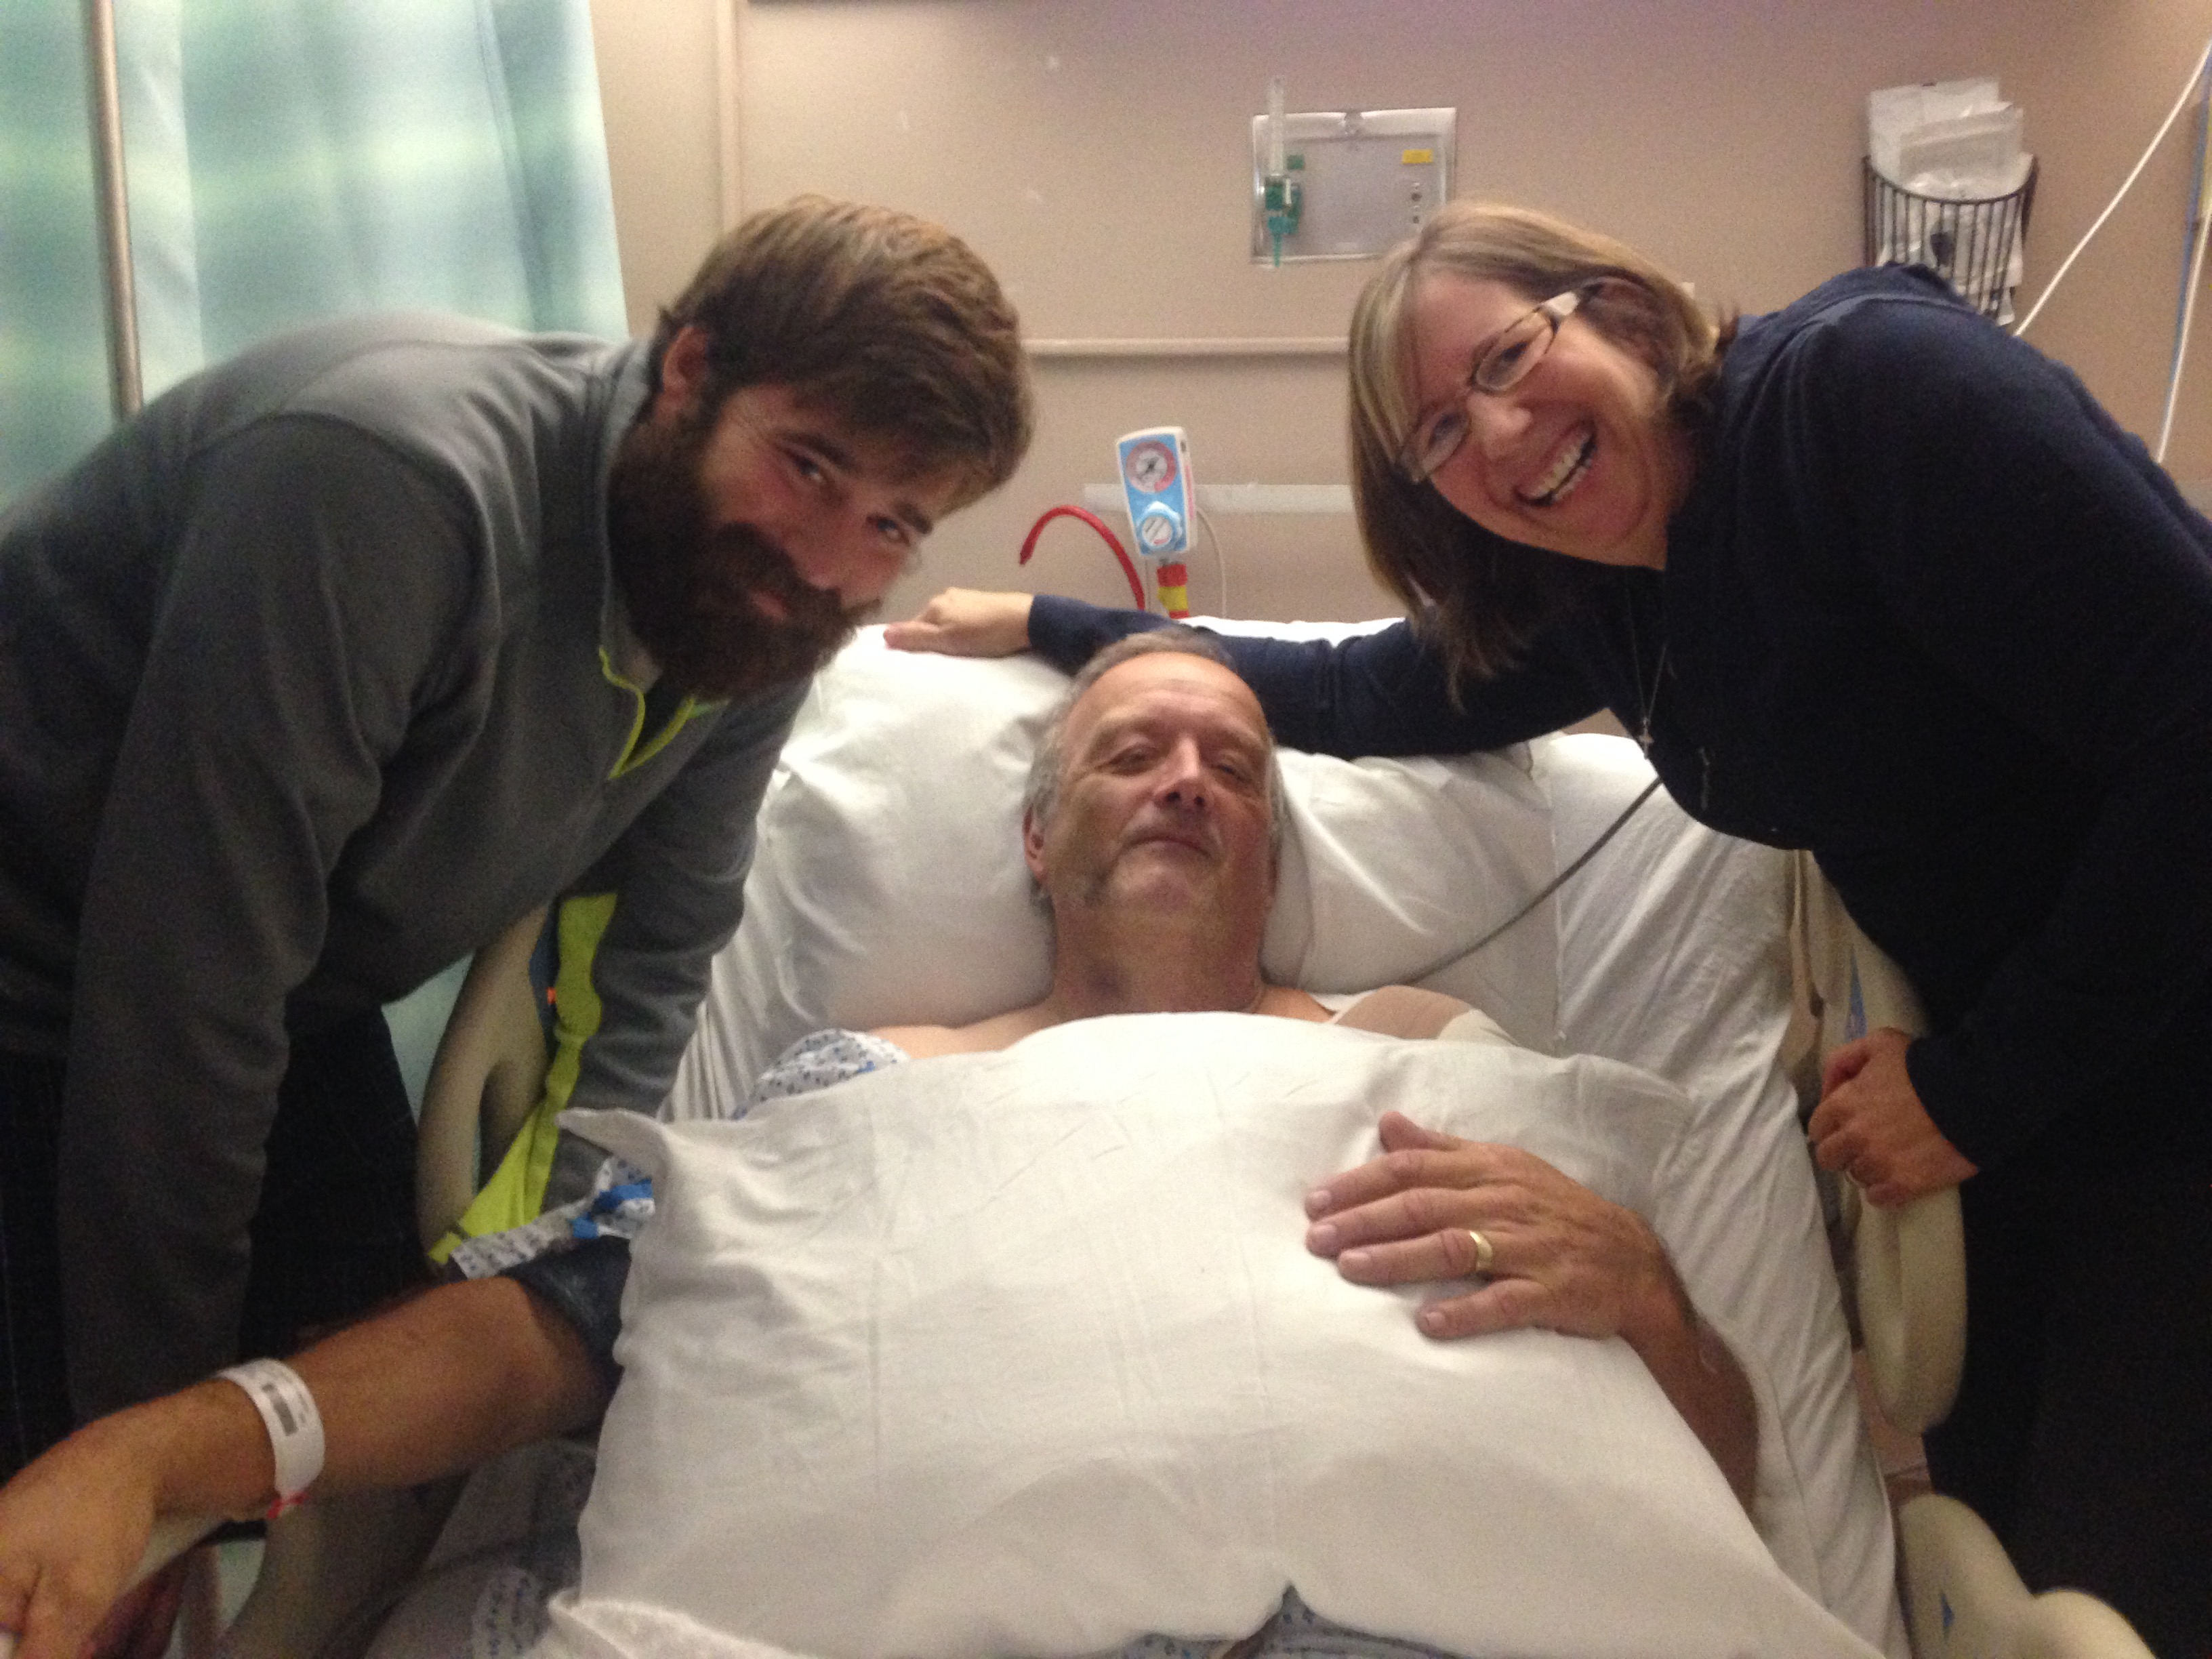 On the road to recovery, Lloyd ssssss with his son, Drew, and wife Debbie.